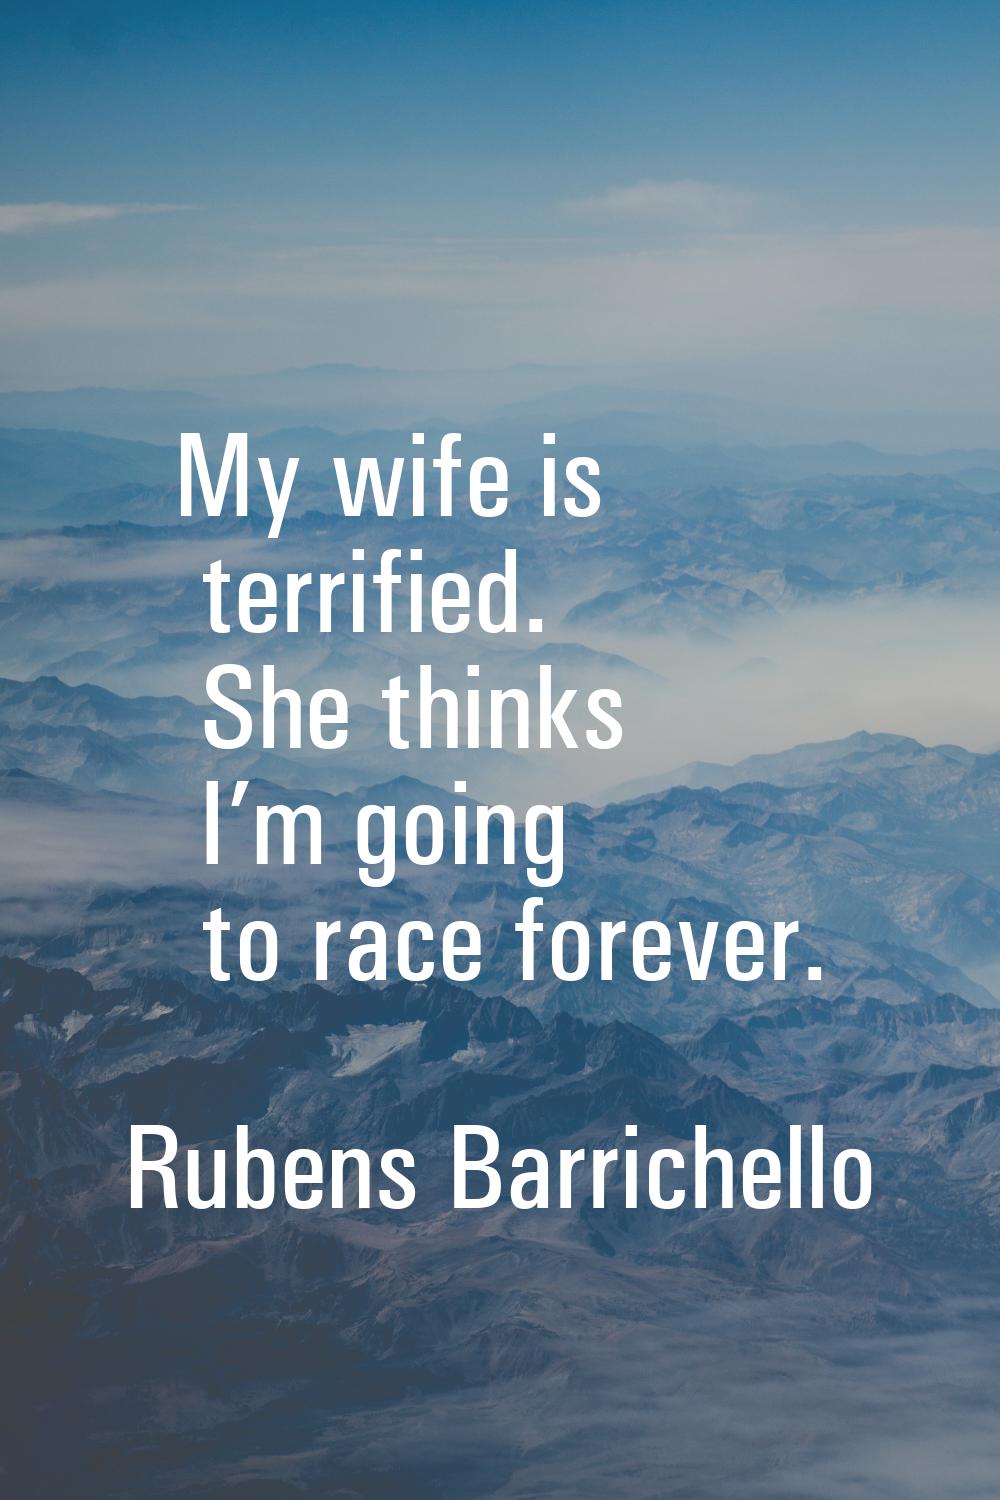 My wife is terrified. She thinks I’m going to race forever.